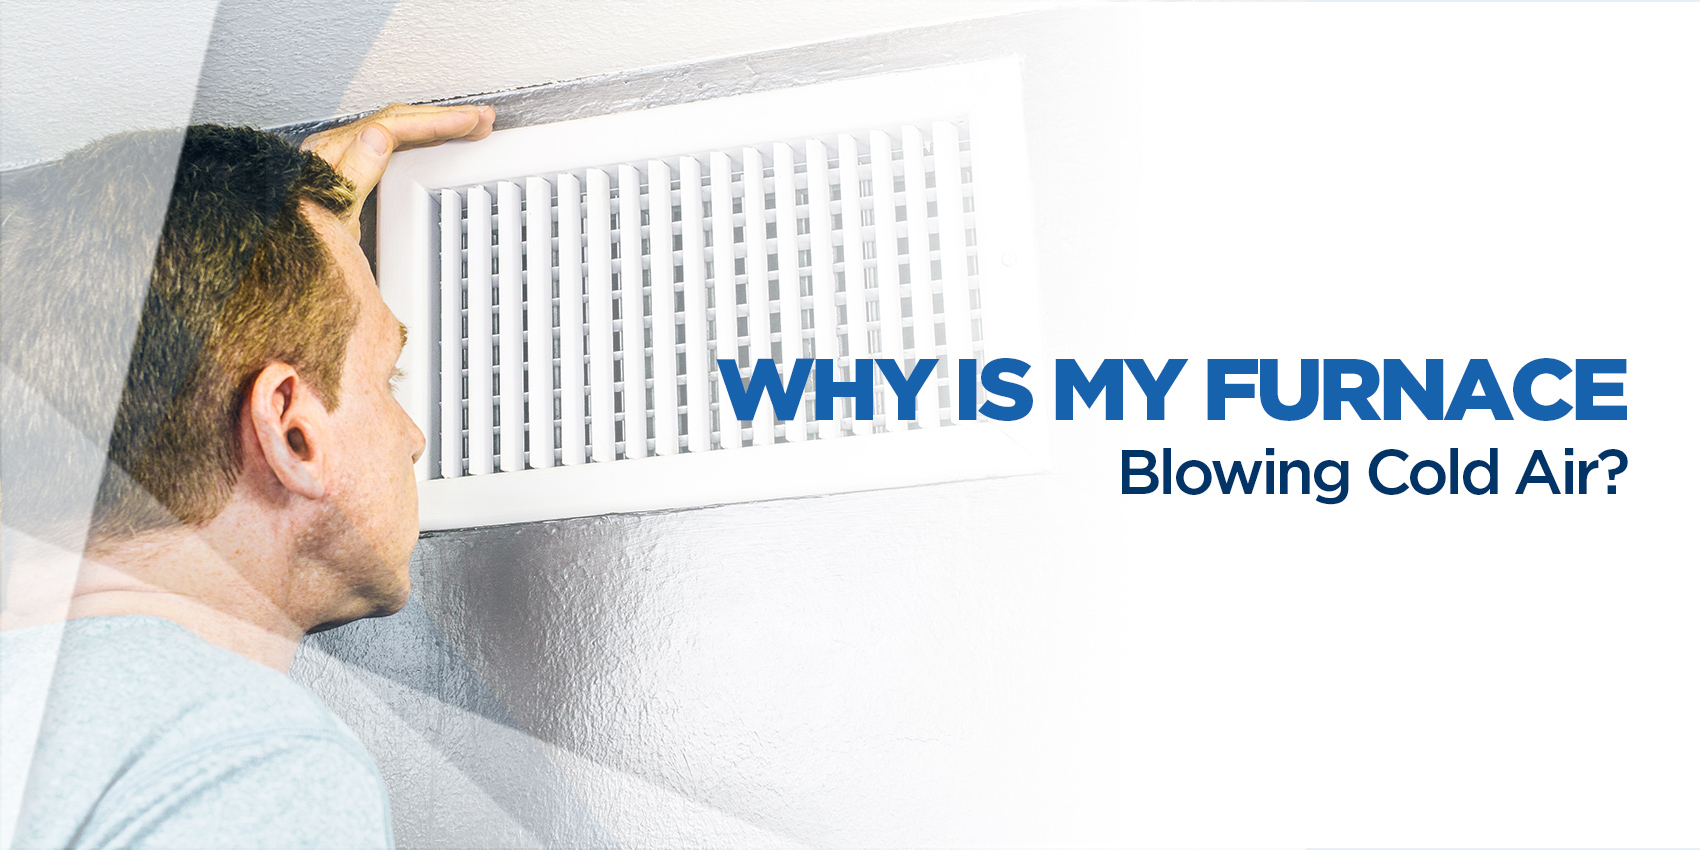 Why Is My Furnace Blowing Cold Air?